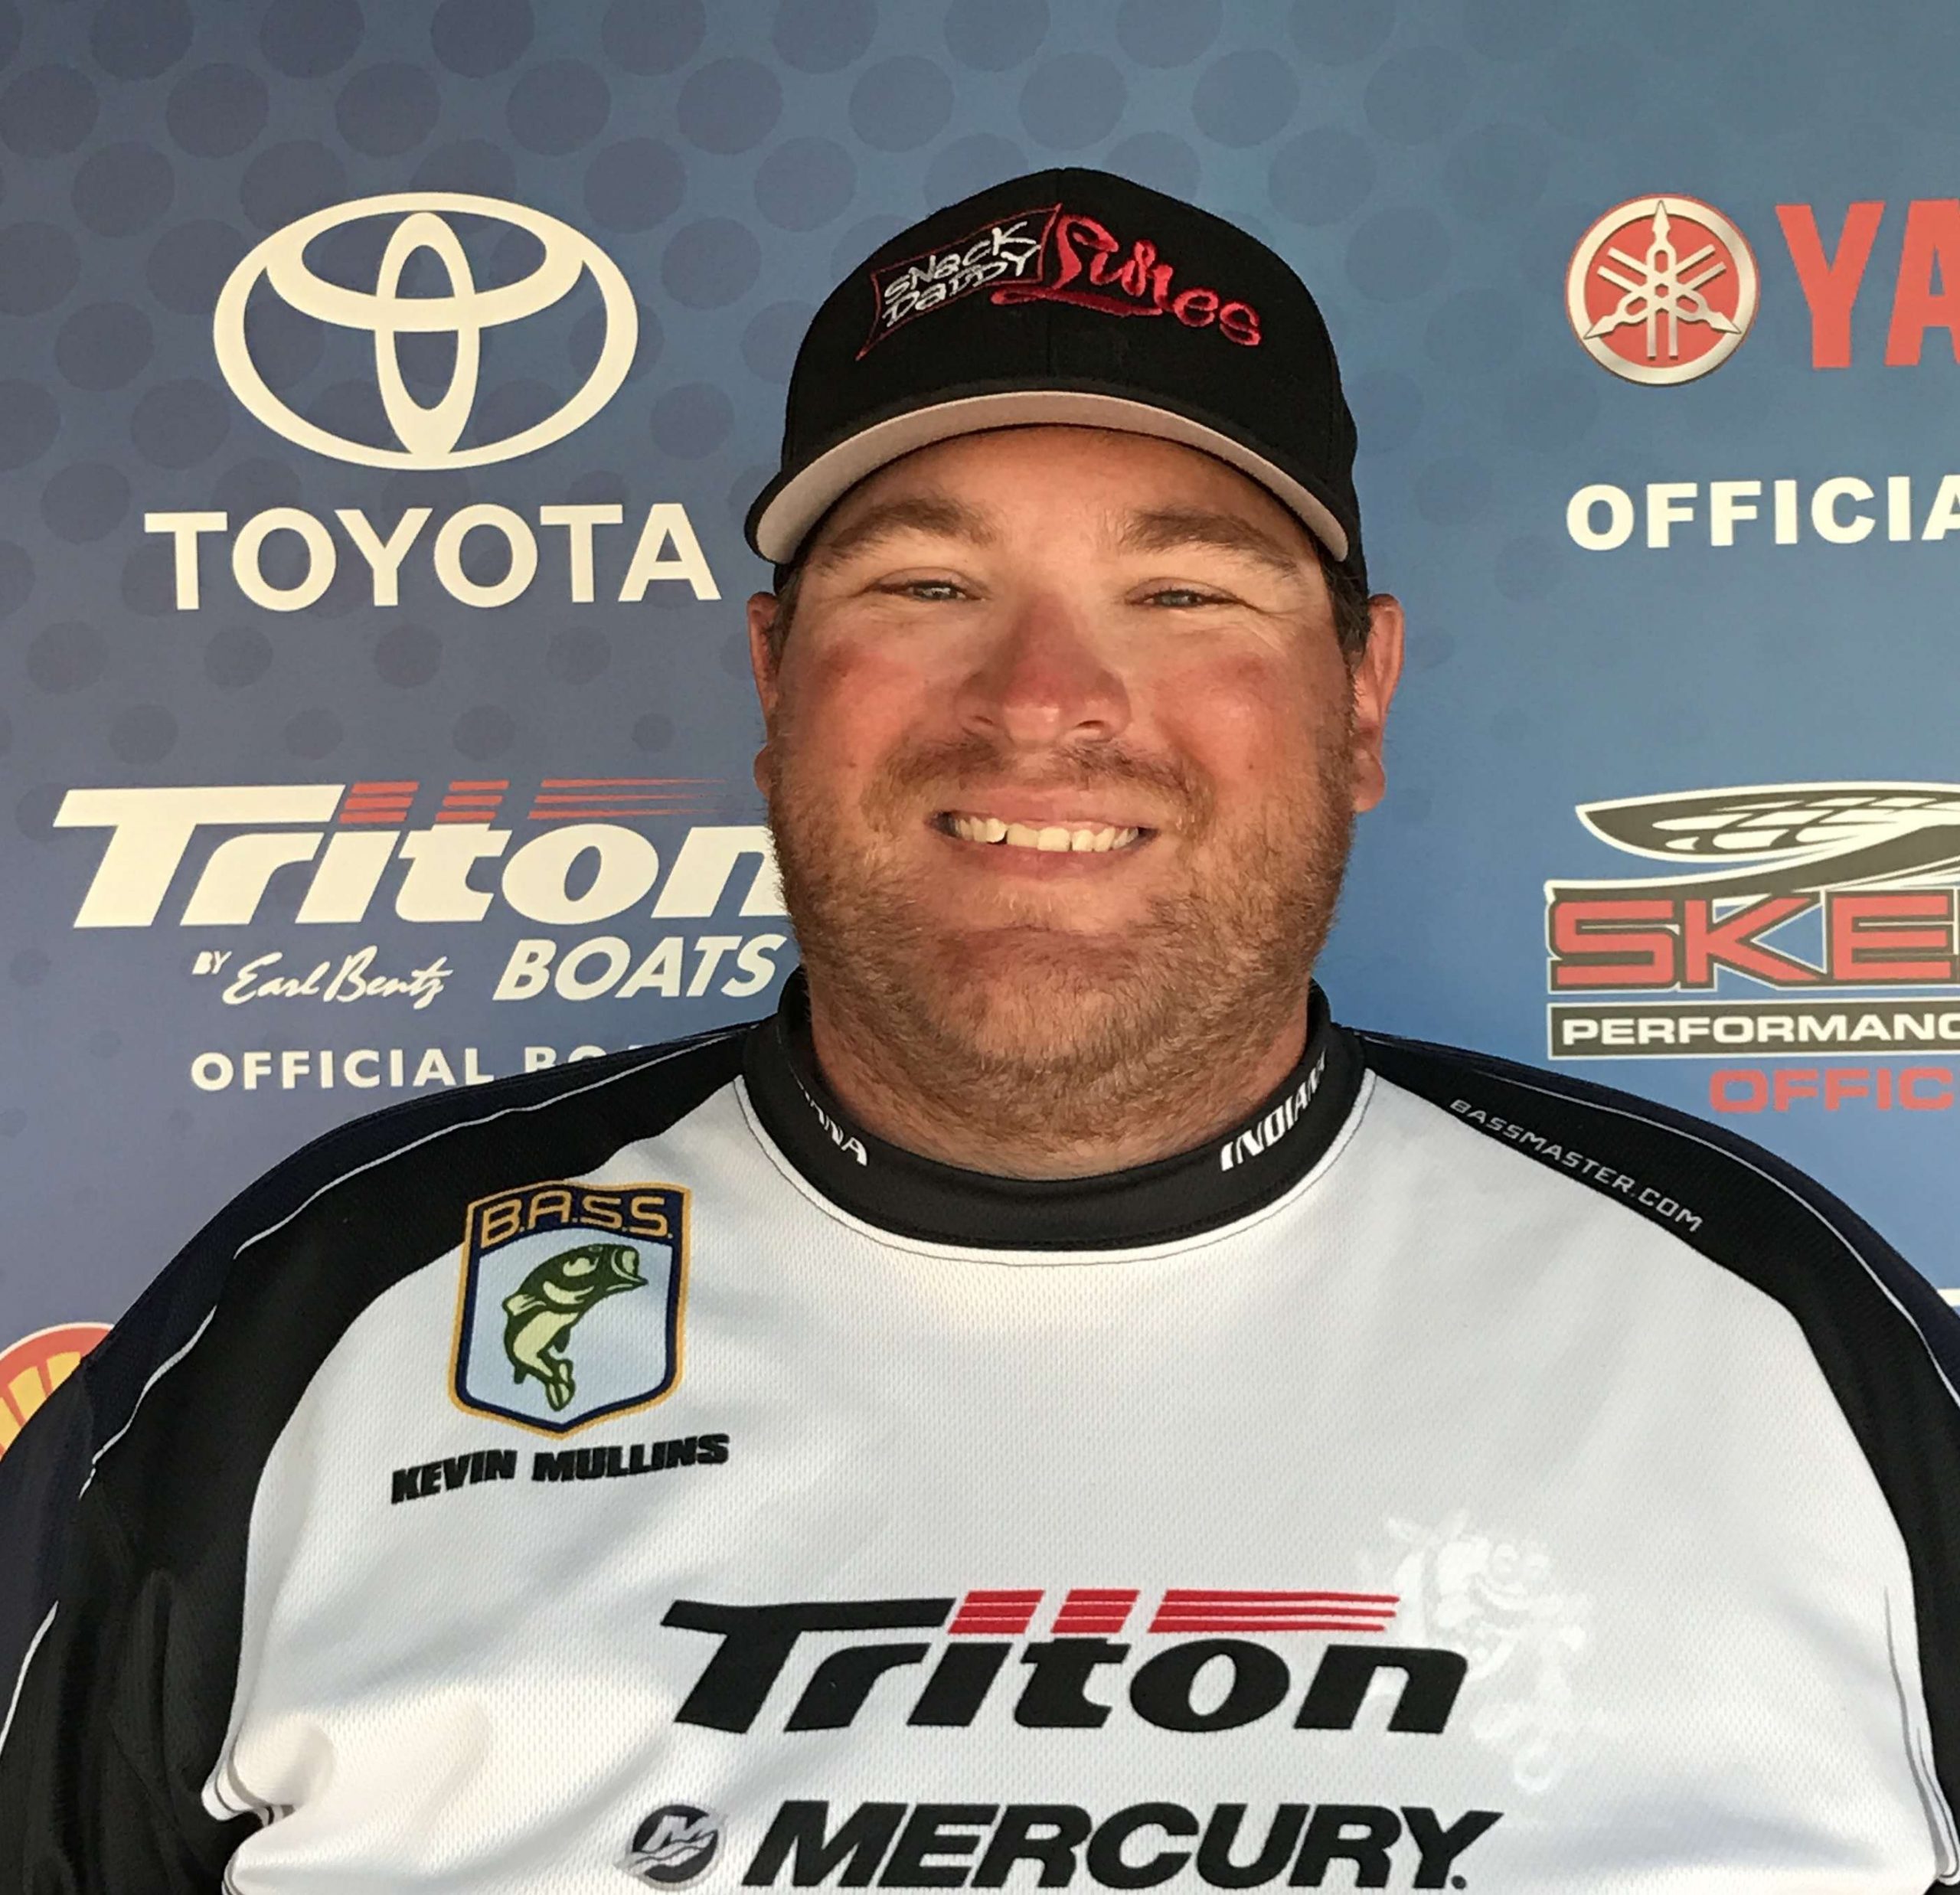 <h4>
Kevin Mullins</h4>
Indiana Nonboater<br>
B.A.S.S. Nation Club: Bass 811<BR>
Occupation:  Reel tech<BR>
Hobbies: Squirrel hunting and watching any racing<BR>
Sponsors: Tackle Service Center, Snack Daddy Lures, LJS Home Improvements



